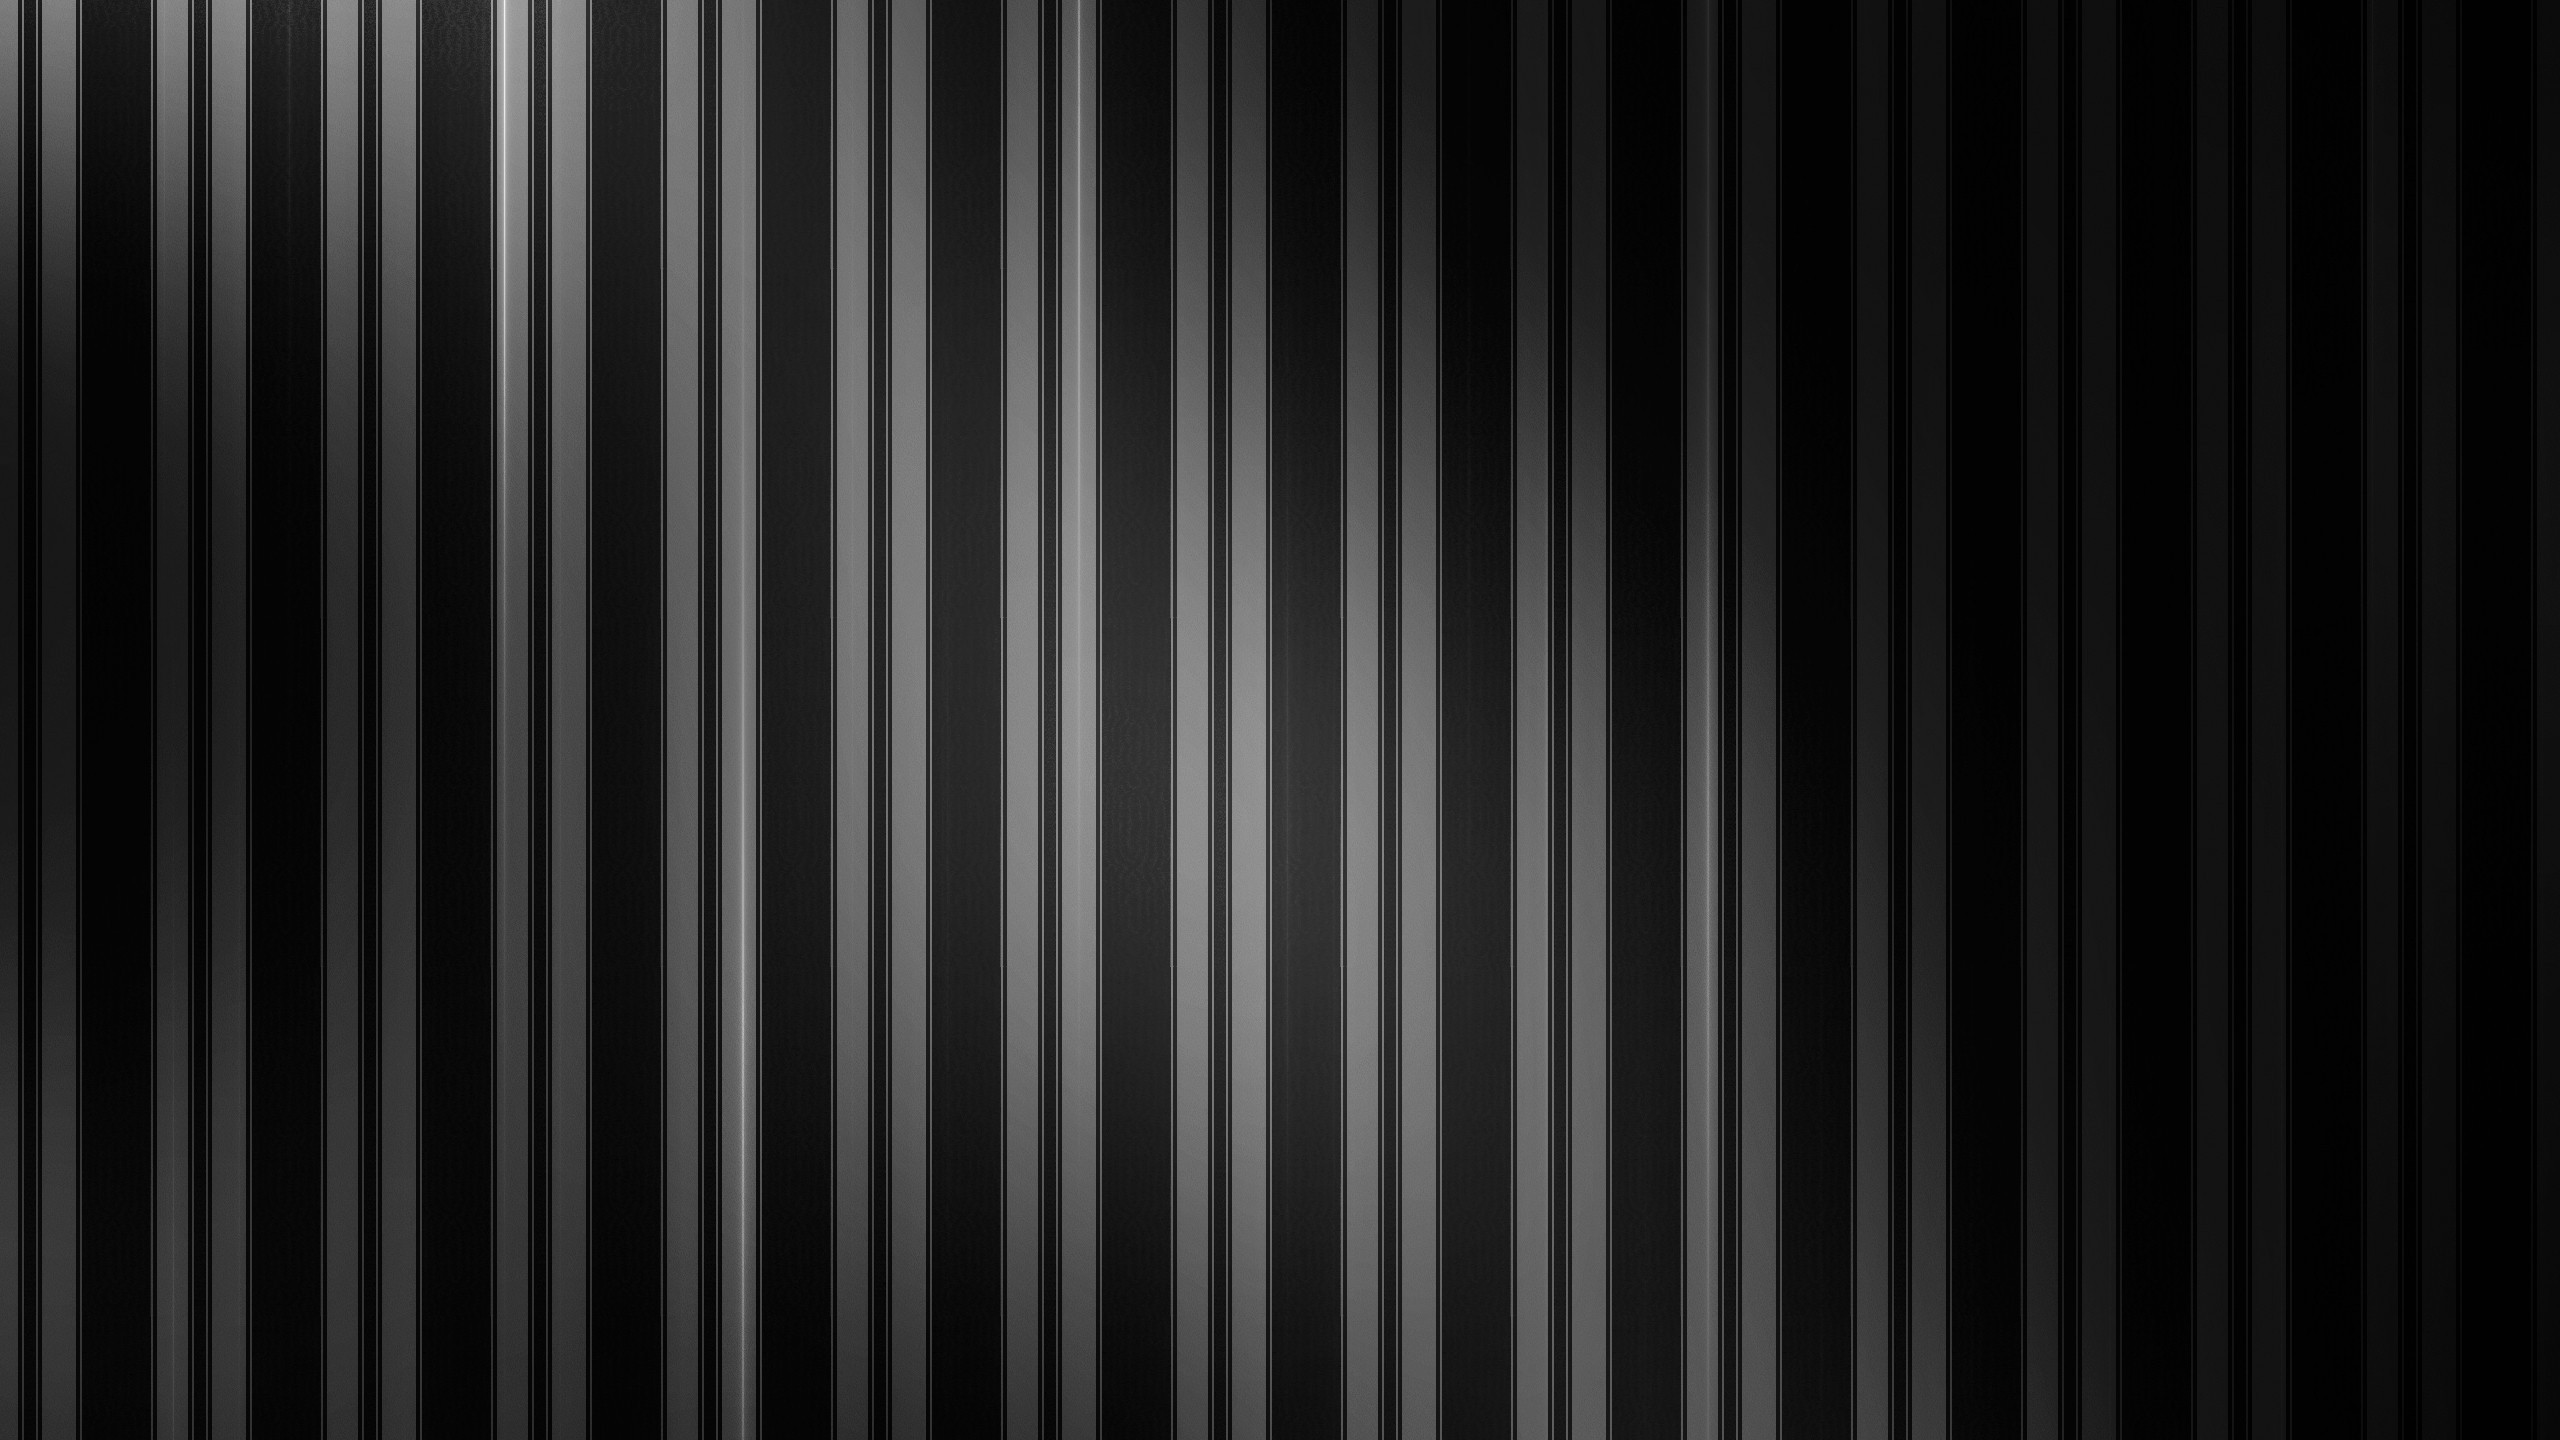  Black  and White  Striped  background    Download free 